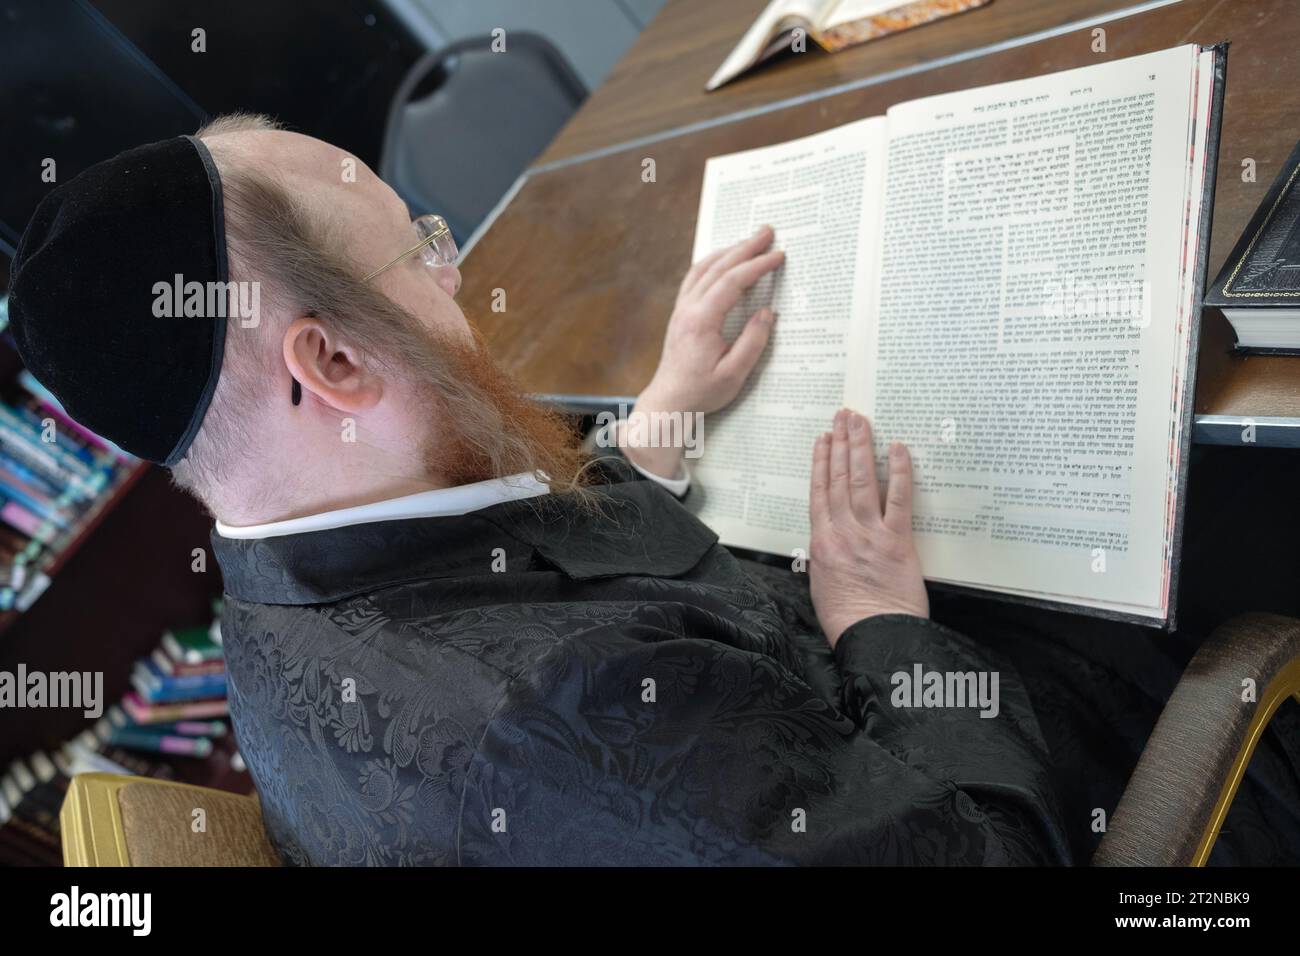 An orthodox rabbi reads from the Talmud in a class he is teaching adults in a synagogue in Rockland County, New York. Stock Photo